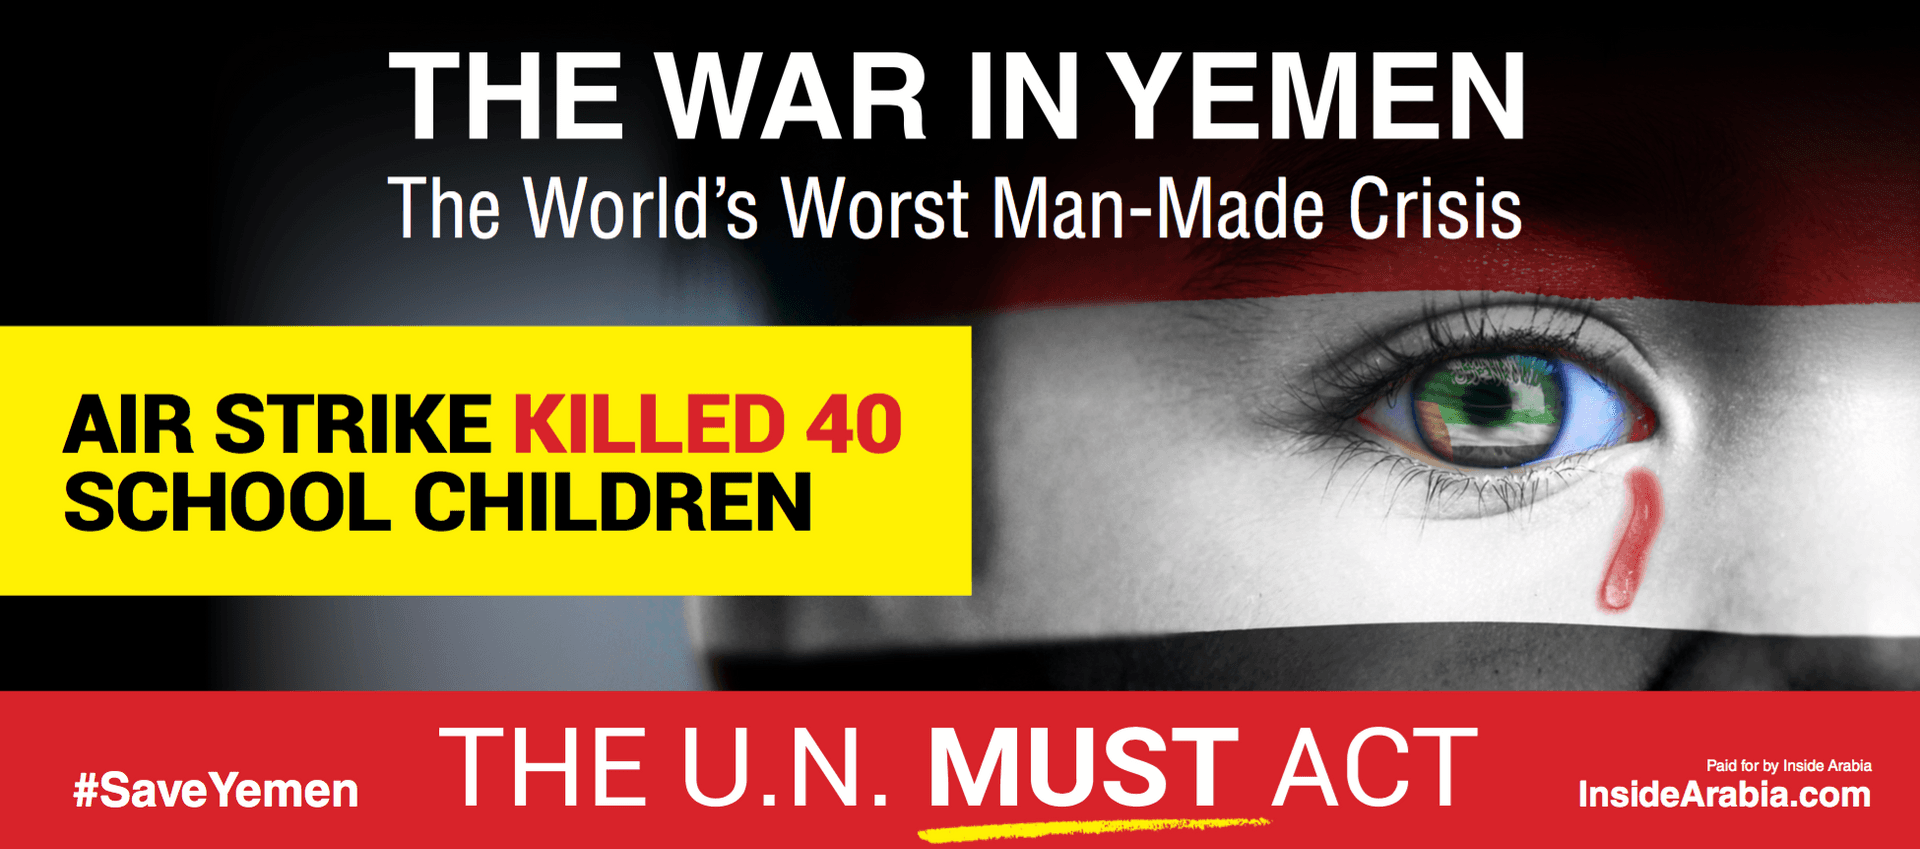 #SaveYemen graphic combines image of the face of a Yemeni child with messages about the Yemen war